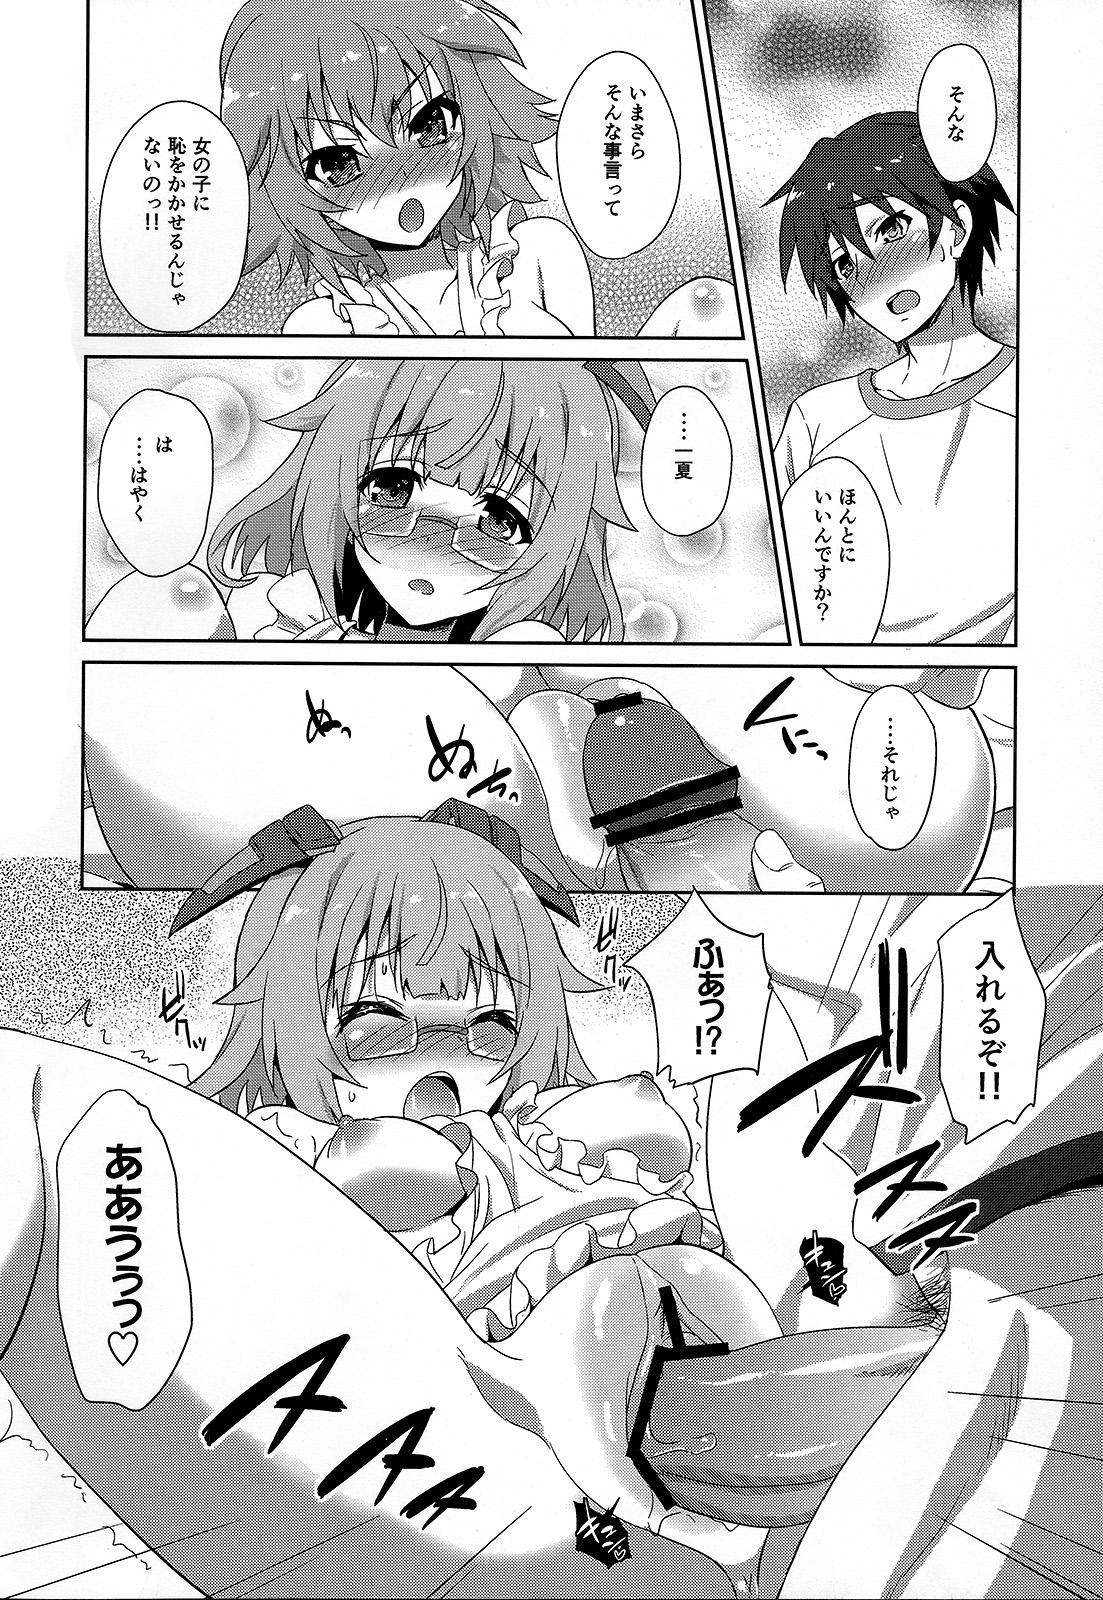 Audition IS ICHIKA LOVE SISTERS!! - Infinite stratos Perrito - Page 11